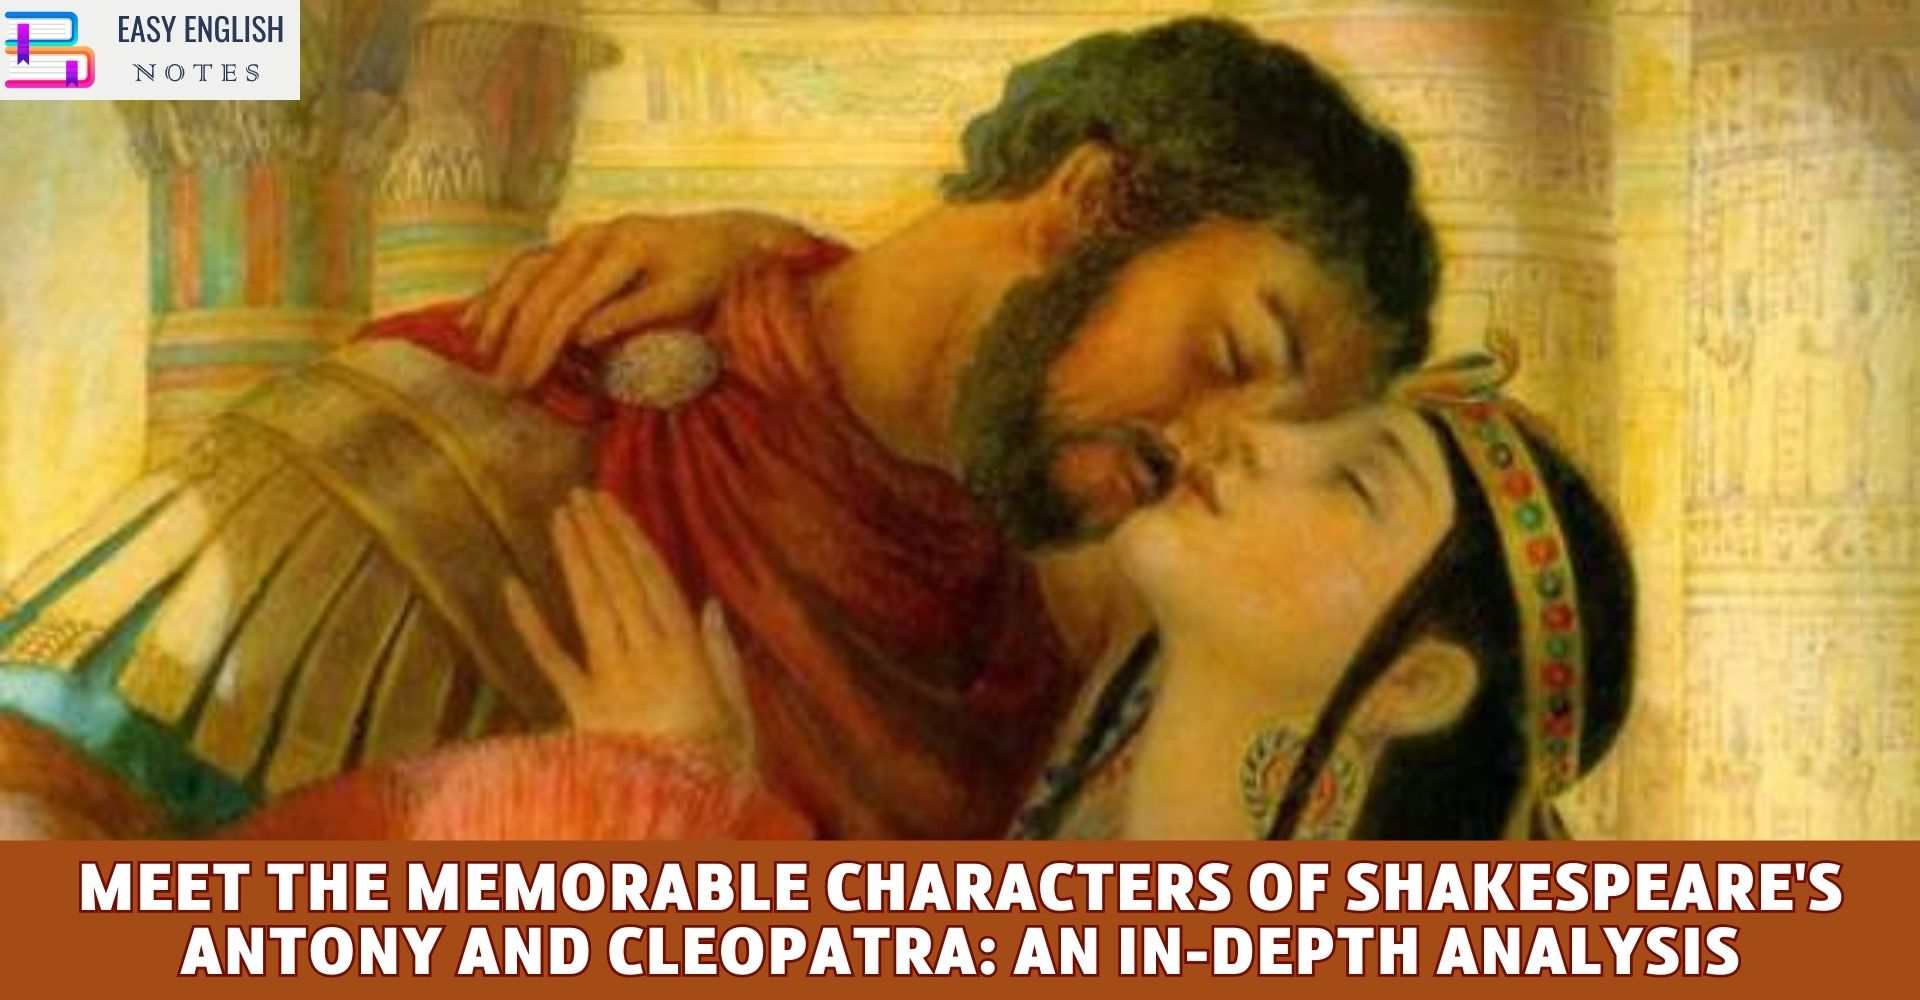 Meet the Memorable Characters of Shakespeare's Antony and Cleopatra: An In-Depth Analysis